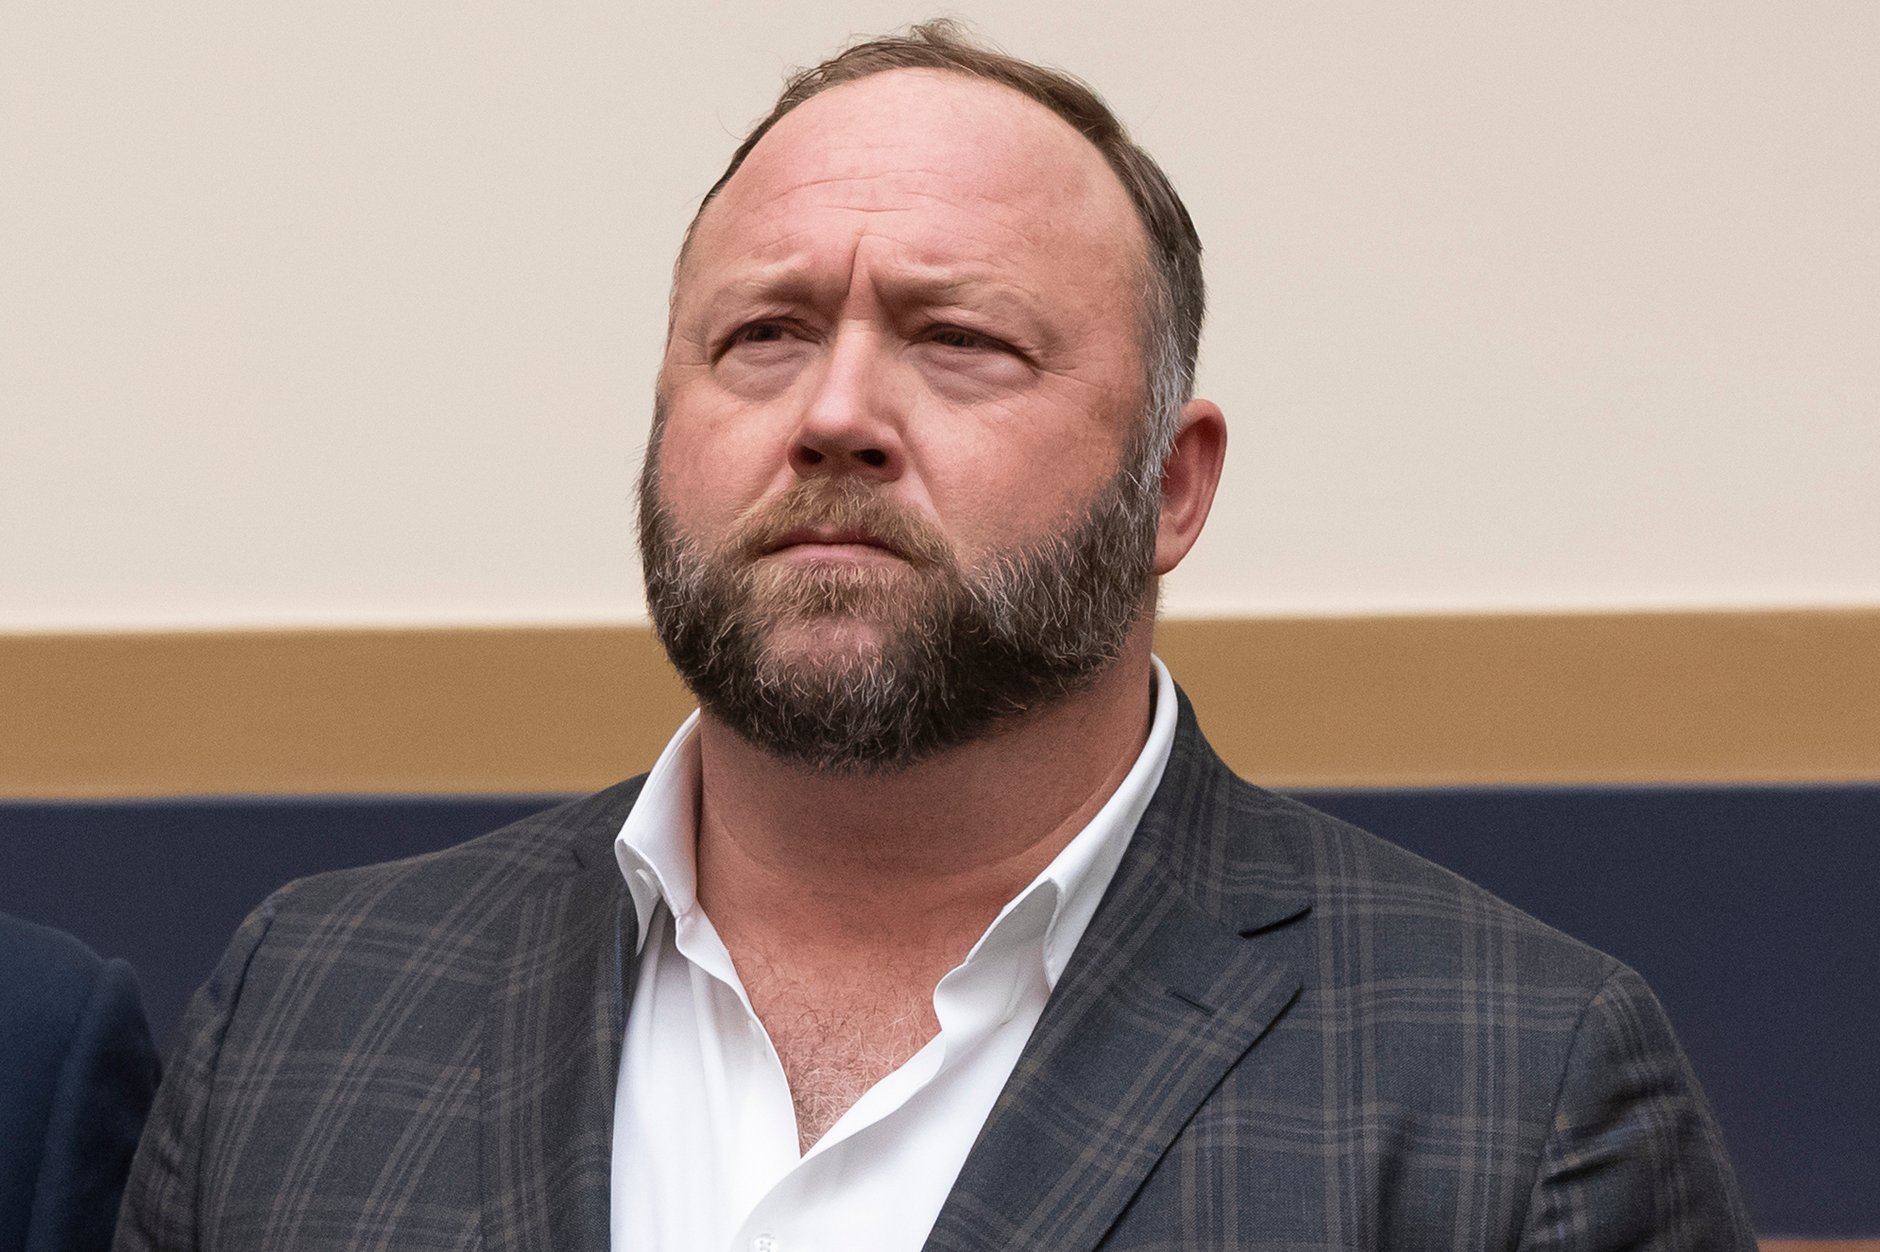 Alex Jones appears for questioning in Sandy Hook lawsuit | Courthouse News  Service